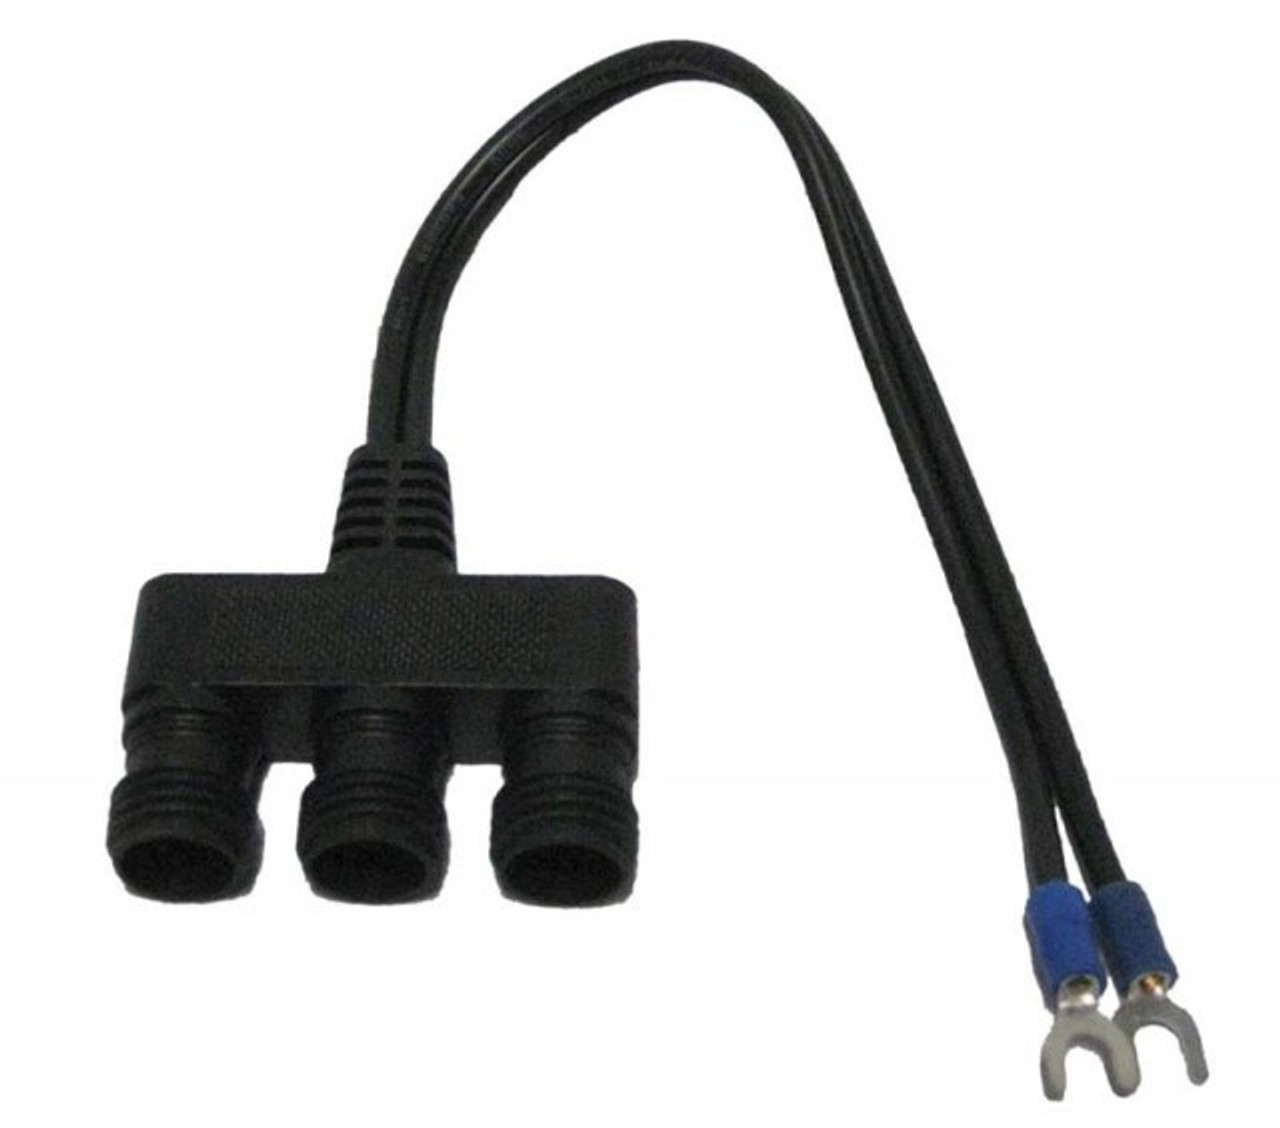 EasyPro 3-Way LED Splitter w/ Forked Connector